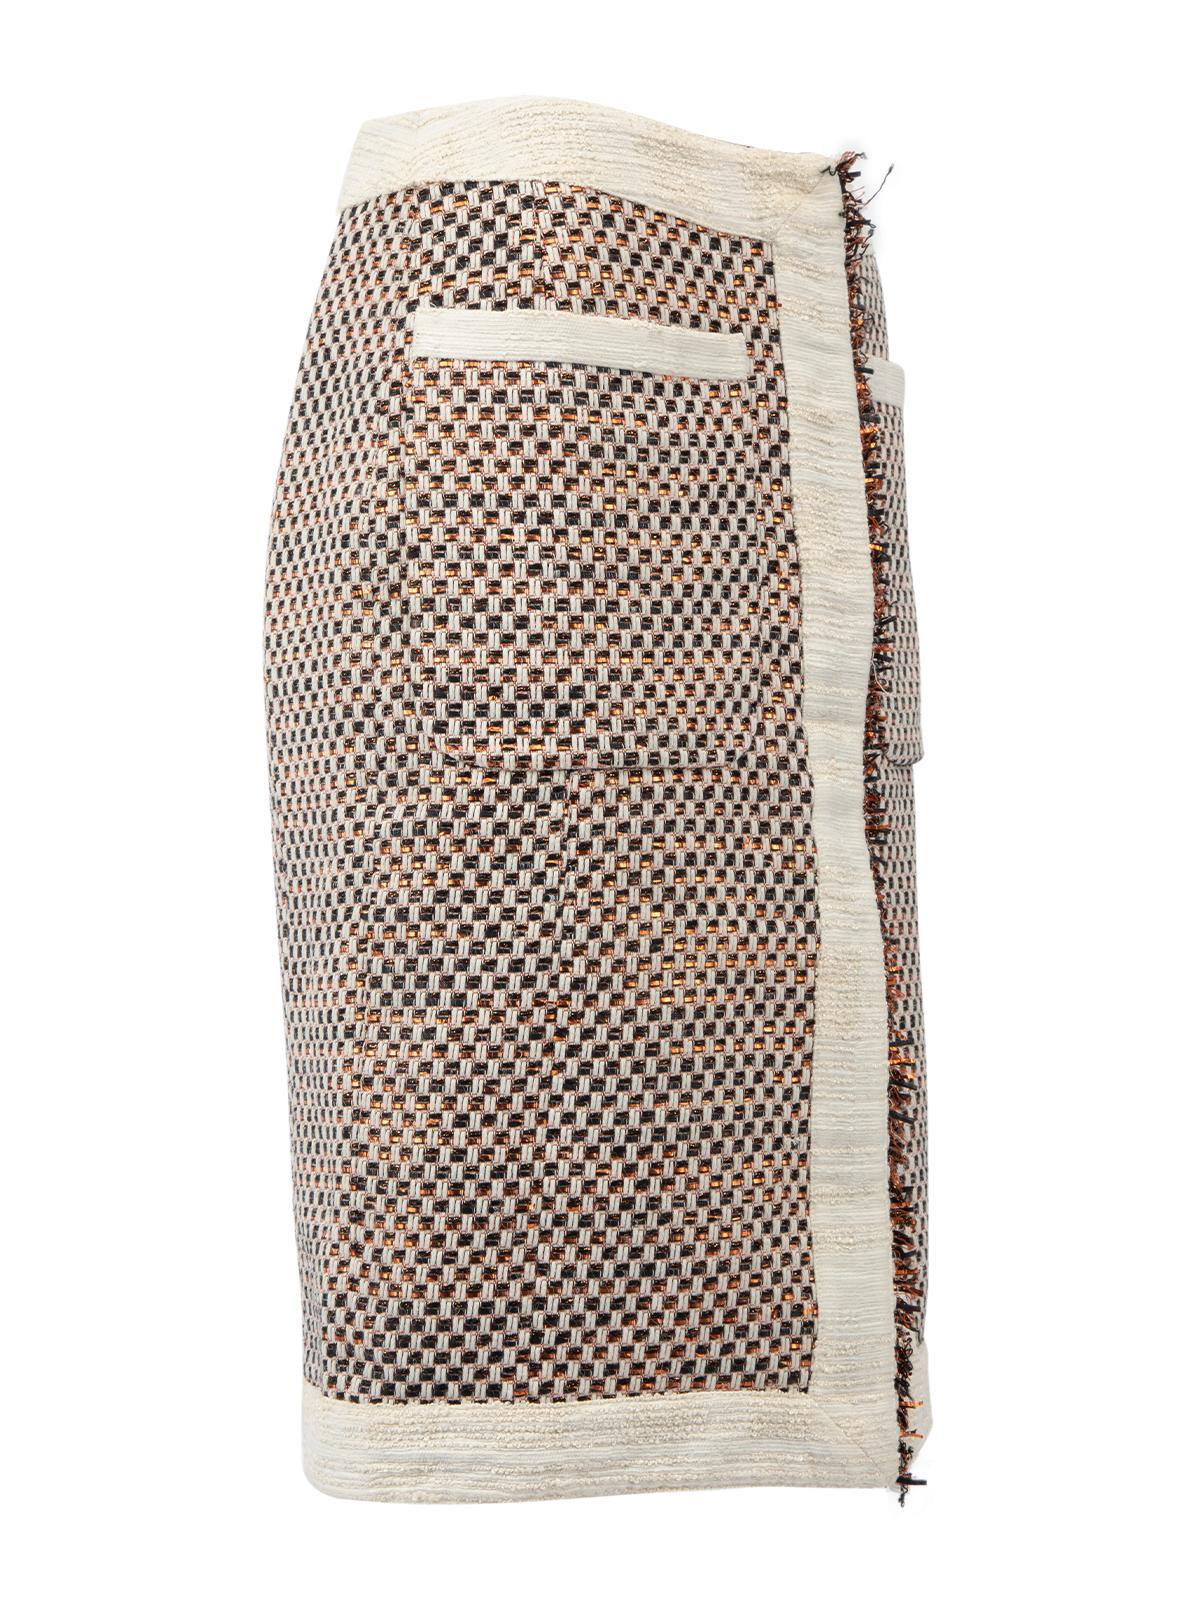 CONDITION is Very good. Hardly any visible wear to skirt is evident. A couple of loose threads can be seen near the hem at the front of this used Altuzarra designer resale item. Details Multicolour- White, black and copper Cotton Pencil skirt Knee